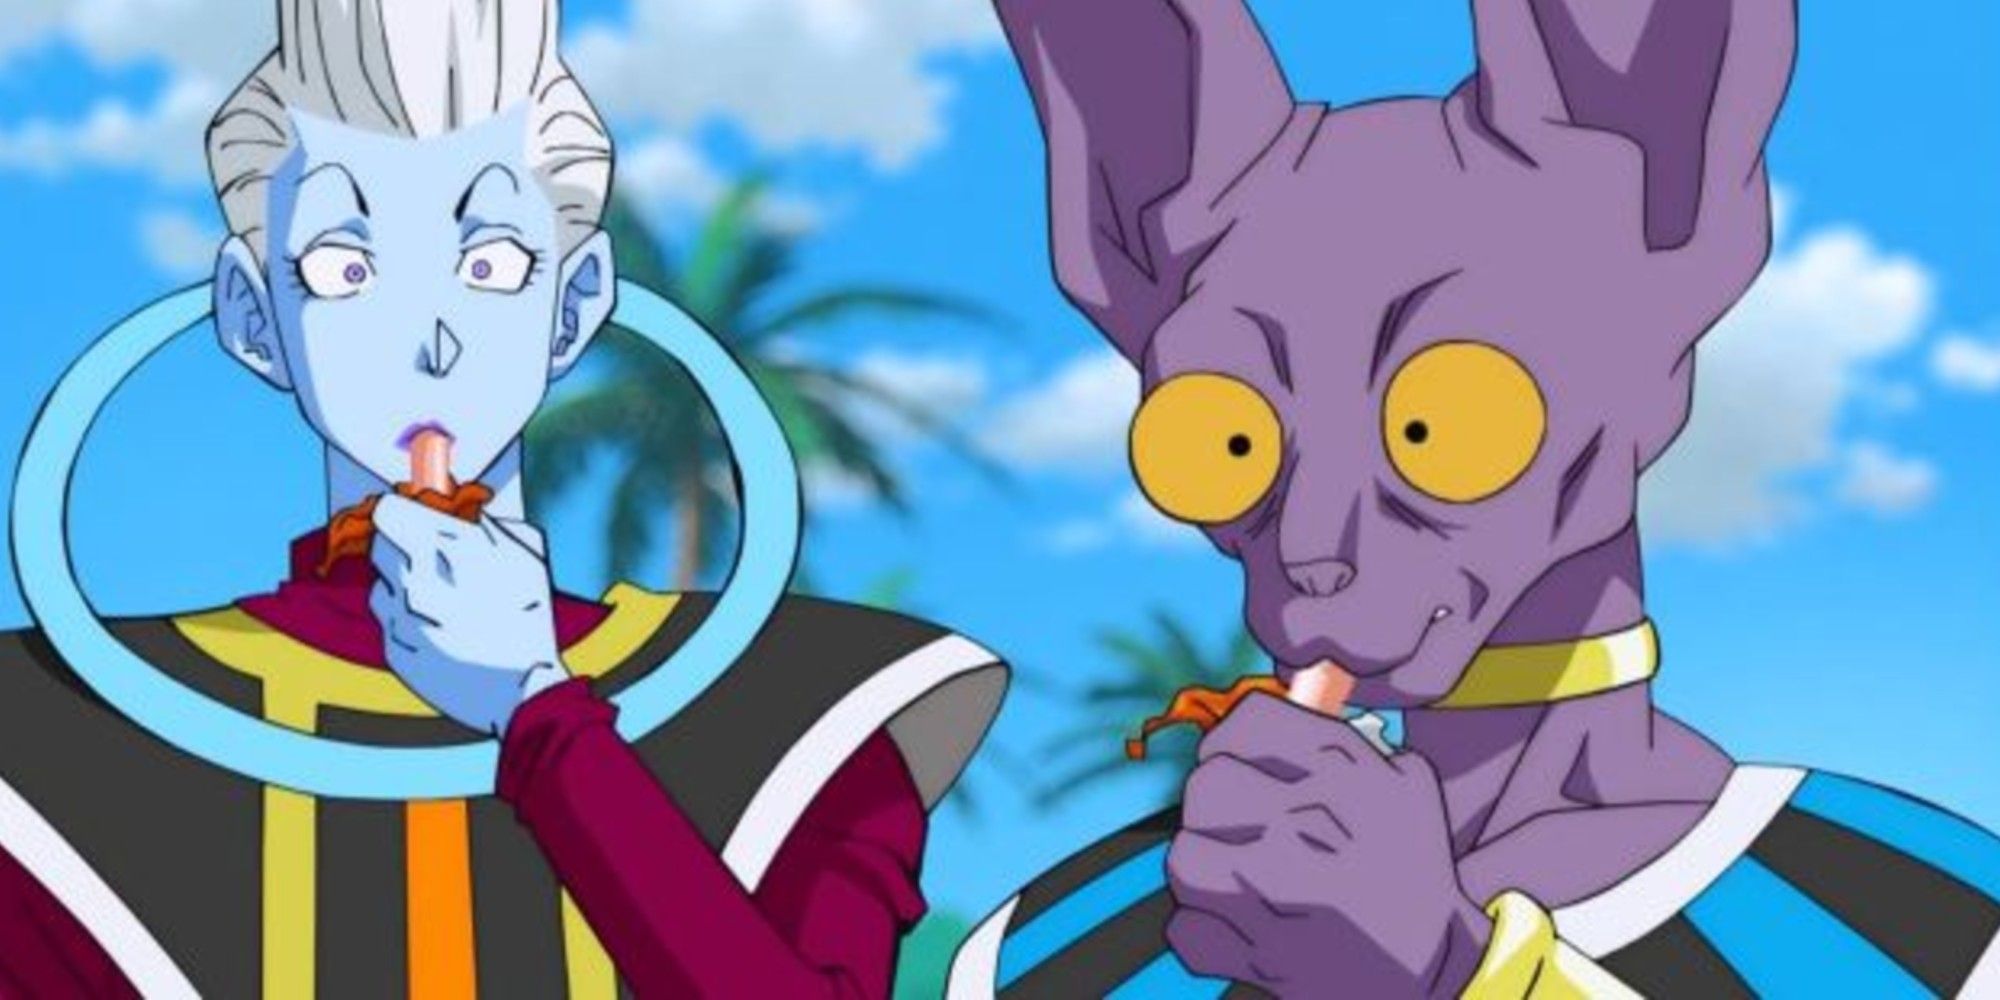 Anime Beerus And Whis Enjoying A Snack